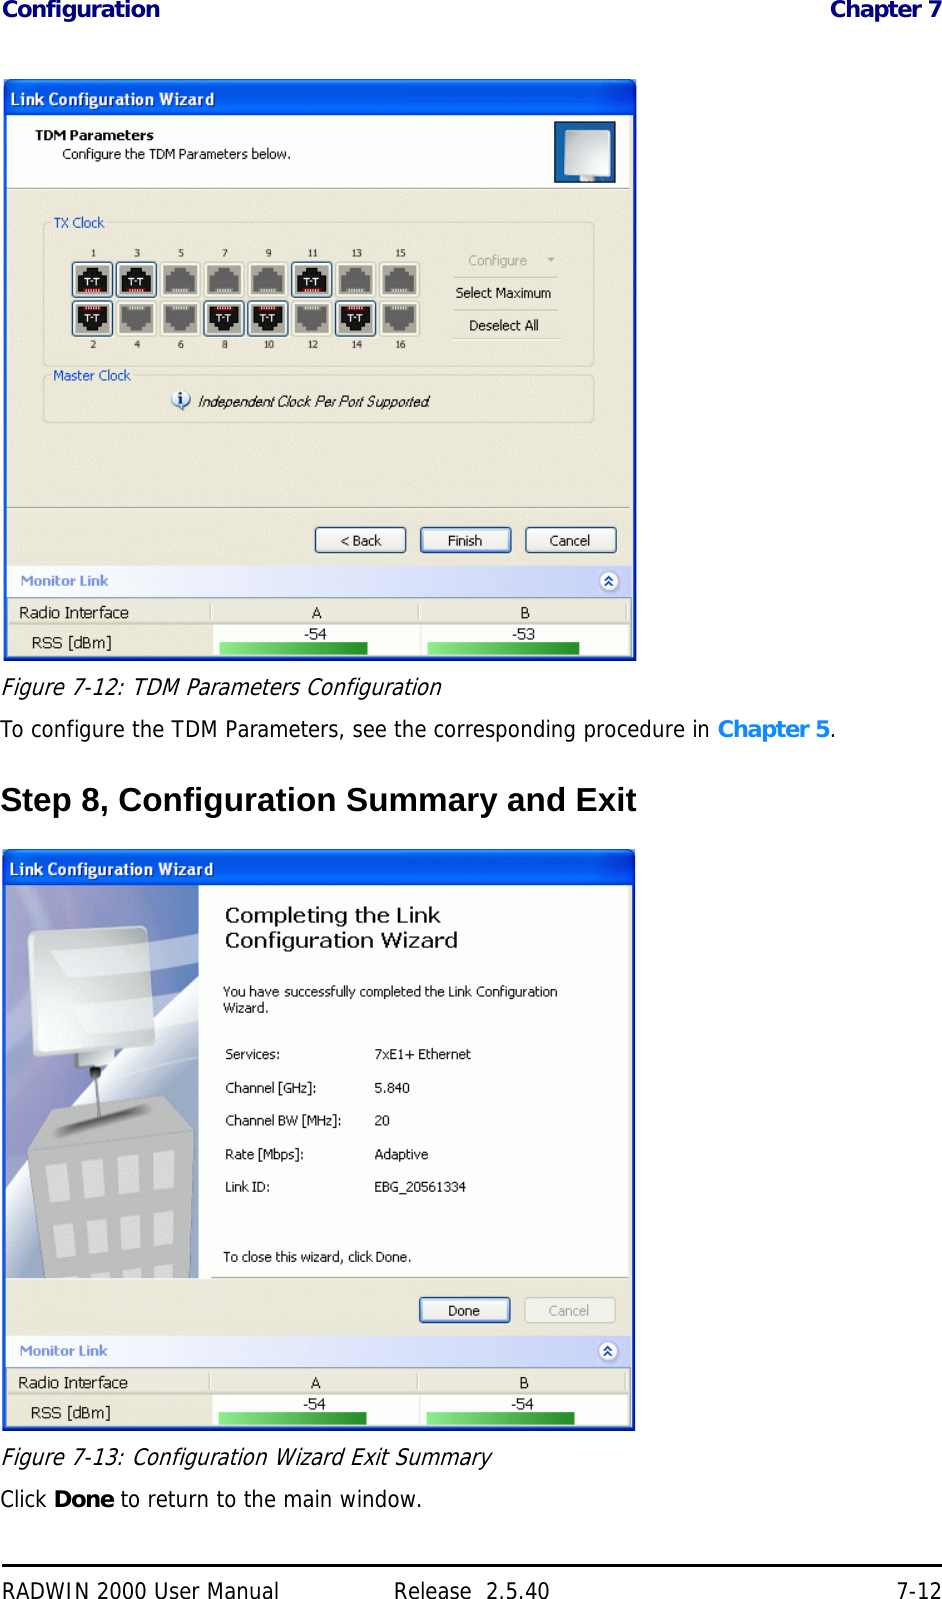 Configuration Chapter 7RADWIN 2000 User Manual Release  2.5.40 7-12.Figure 7-12: TDM Parameters ConfigurationTo configure the TDM Parameters, see the corresponding procedure in Chapter 5.Step 8, Configuration Summary and ExitFigure 7-13: Configuration Wizard Exit SummaryClick Done to return to the main window.